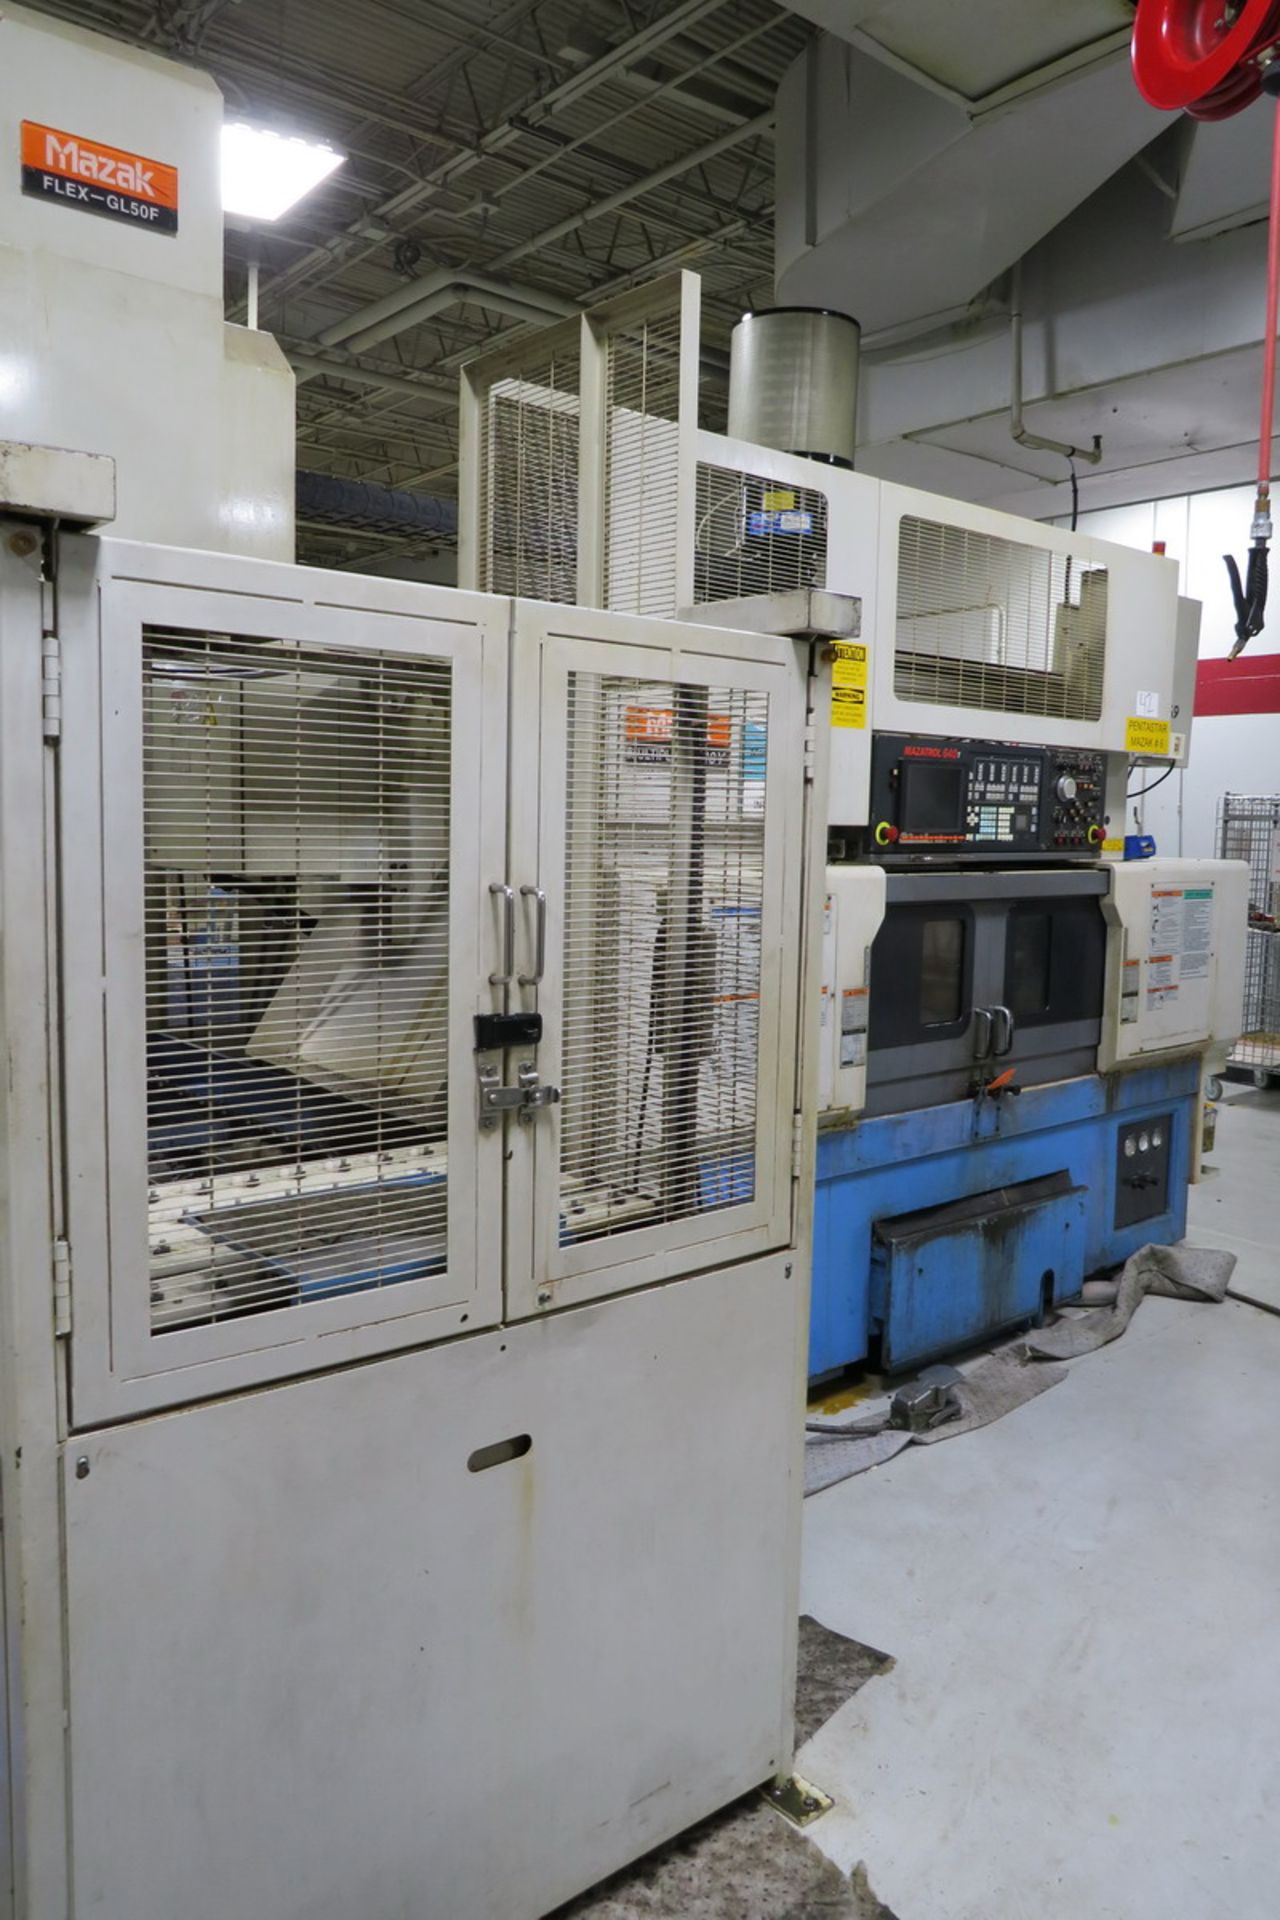 Mazak Model Multiplex 6100Y (S/N: 180111) (2005), Multi-Axis Dual Spindle Turning Center, 6,000 RPM, - Image 2 of 13